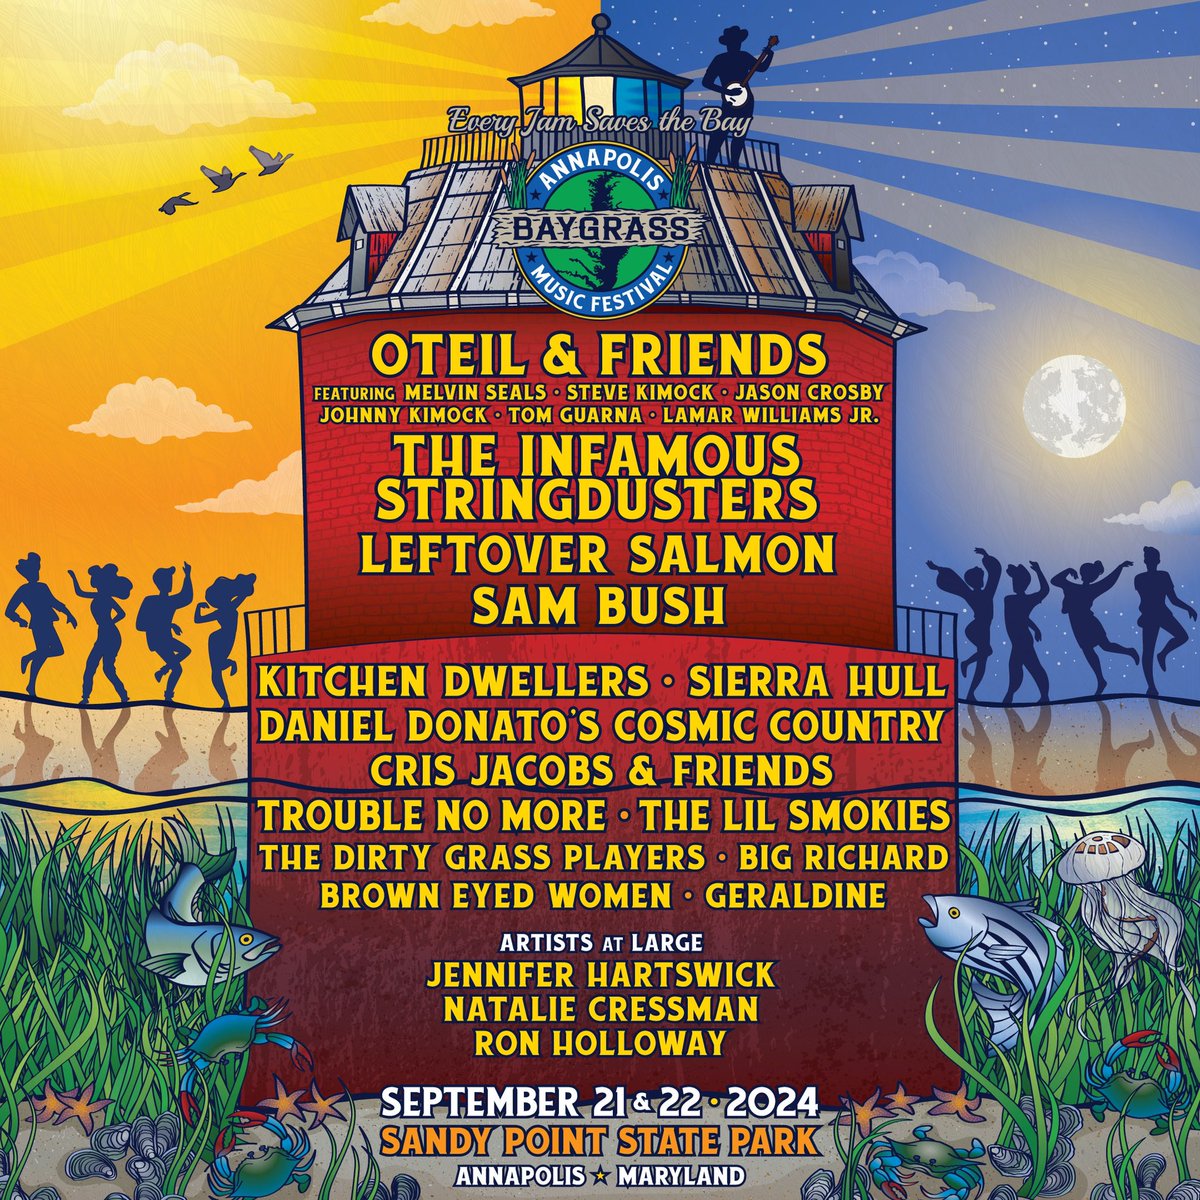 This lineup is stacked! See you at Annapolis Baygrass Music Festival in Maryland on Sept. 21+22! Tix/info: baygrassfestival.com